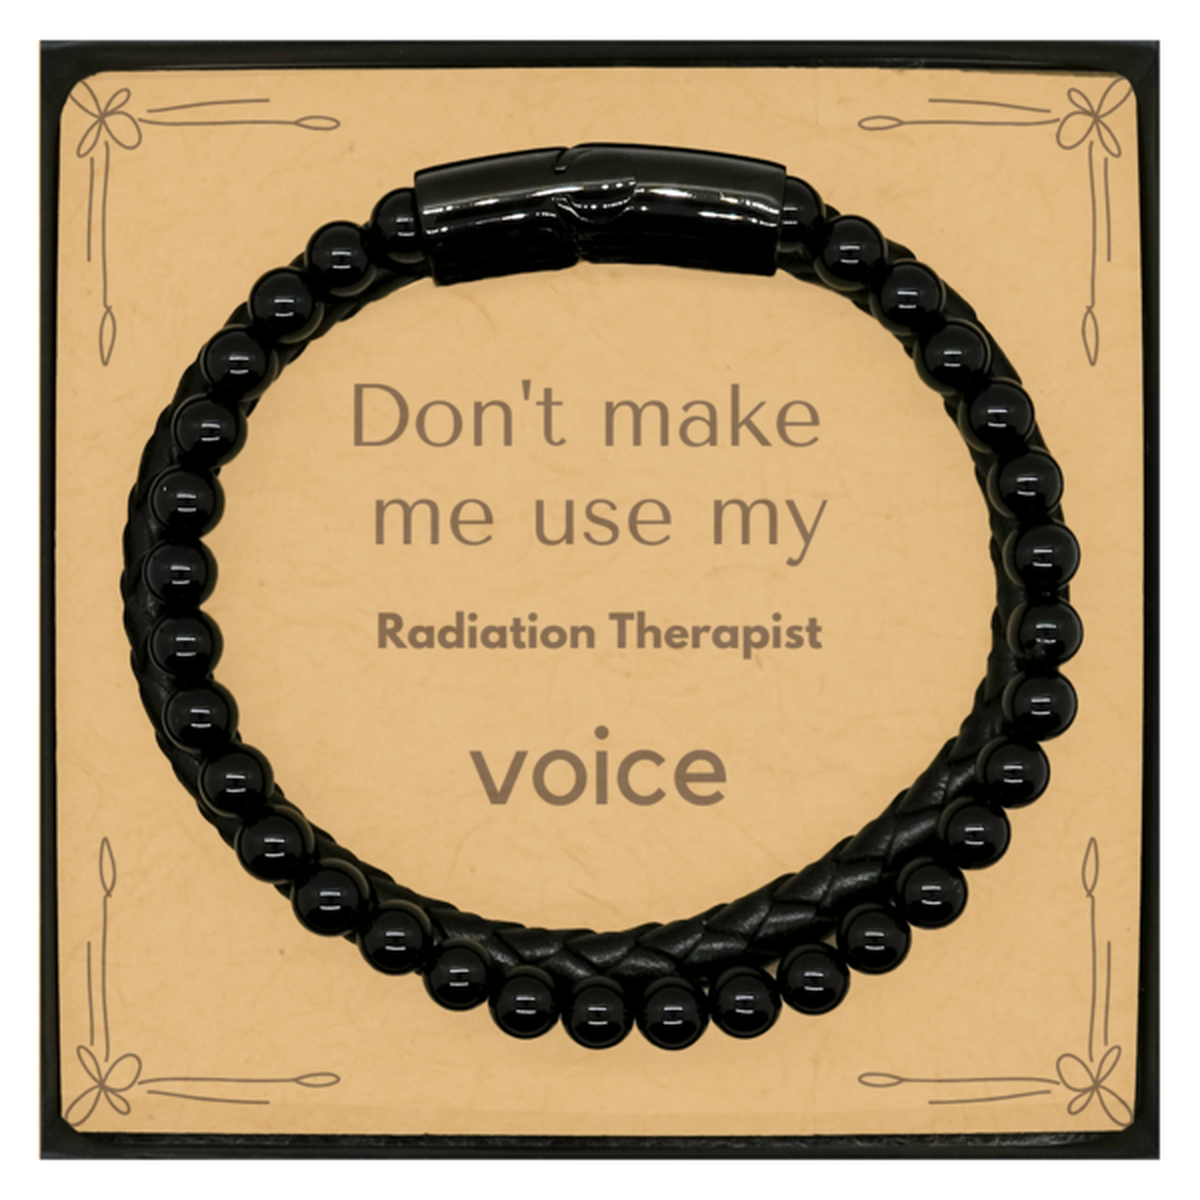 Don't make me use my Radiation Therapist voice, Sarcasm Radiation Therapist Card Gifts, Christmas Radiation Therapist Stone Leather Bracelets Birthday Unique Gifts For Radiation Therapist Coworkers, Men, Women, Colleague, Friends